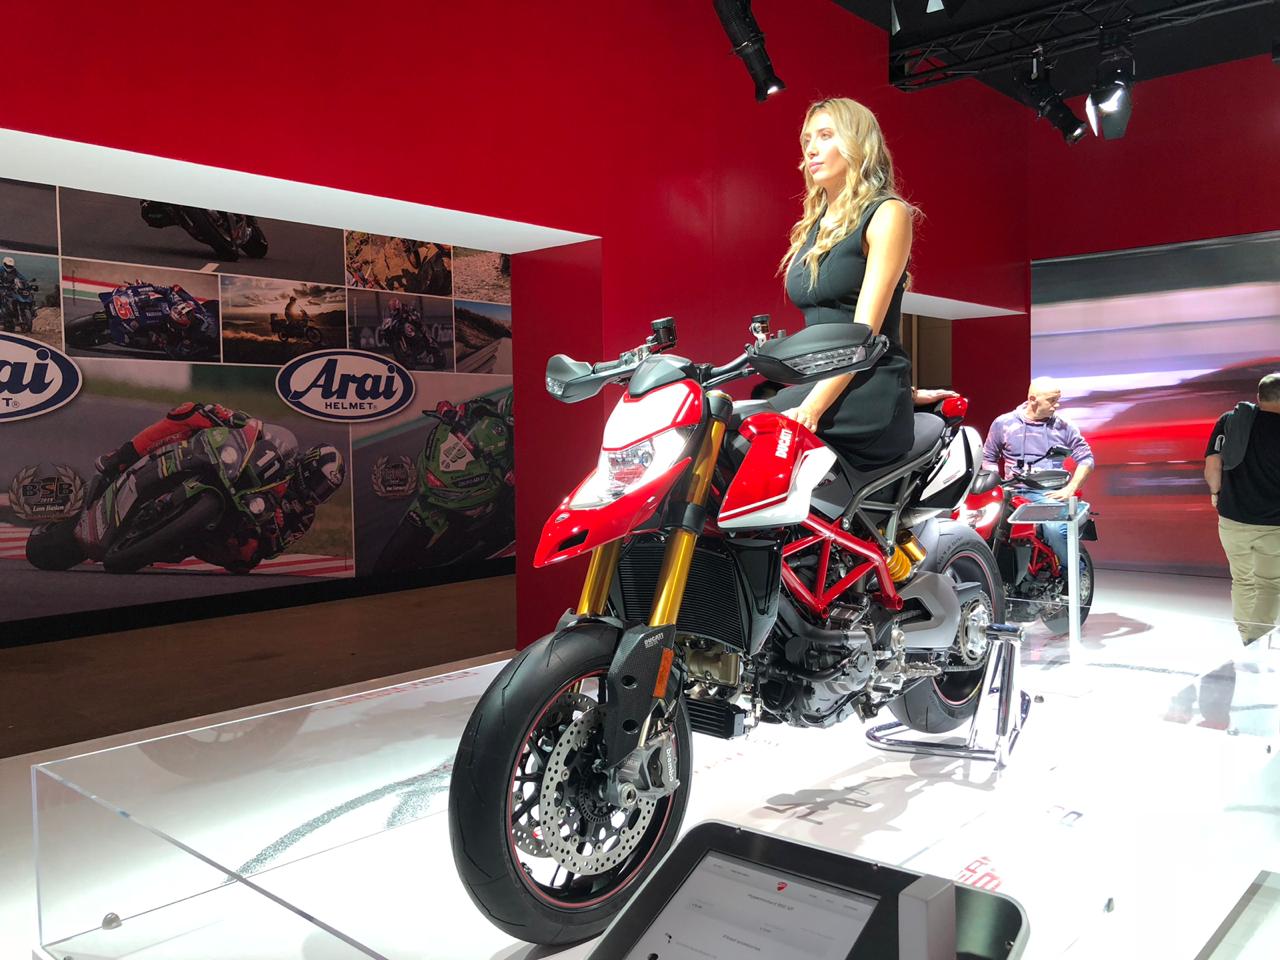 <p>Ducati&nbsp;has also showcased the successor to the&nbsp;939, the Hypermotard 950. This&nbsp; sport naked gets a host of additions over the previous offering which includes more power, torque along with updated electronics. <a href="http://overdrive.in/news-cars-auto/eicma-2018-ducati-hypermotard-950-showcased/">Know all about the&nbsp;Hypermotard&nbsp;950 here.</a></p>